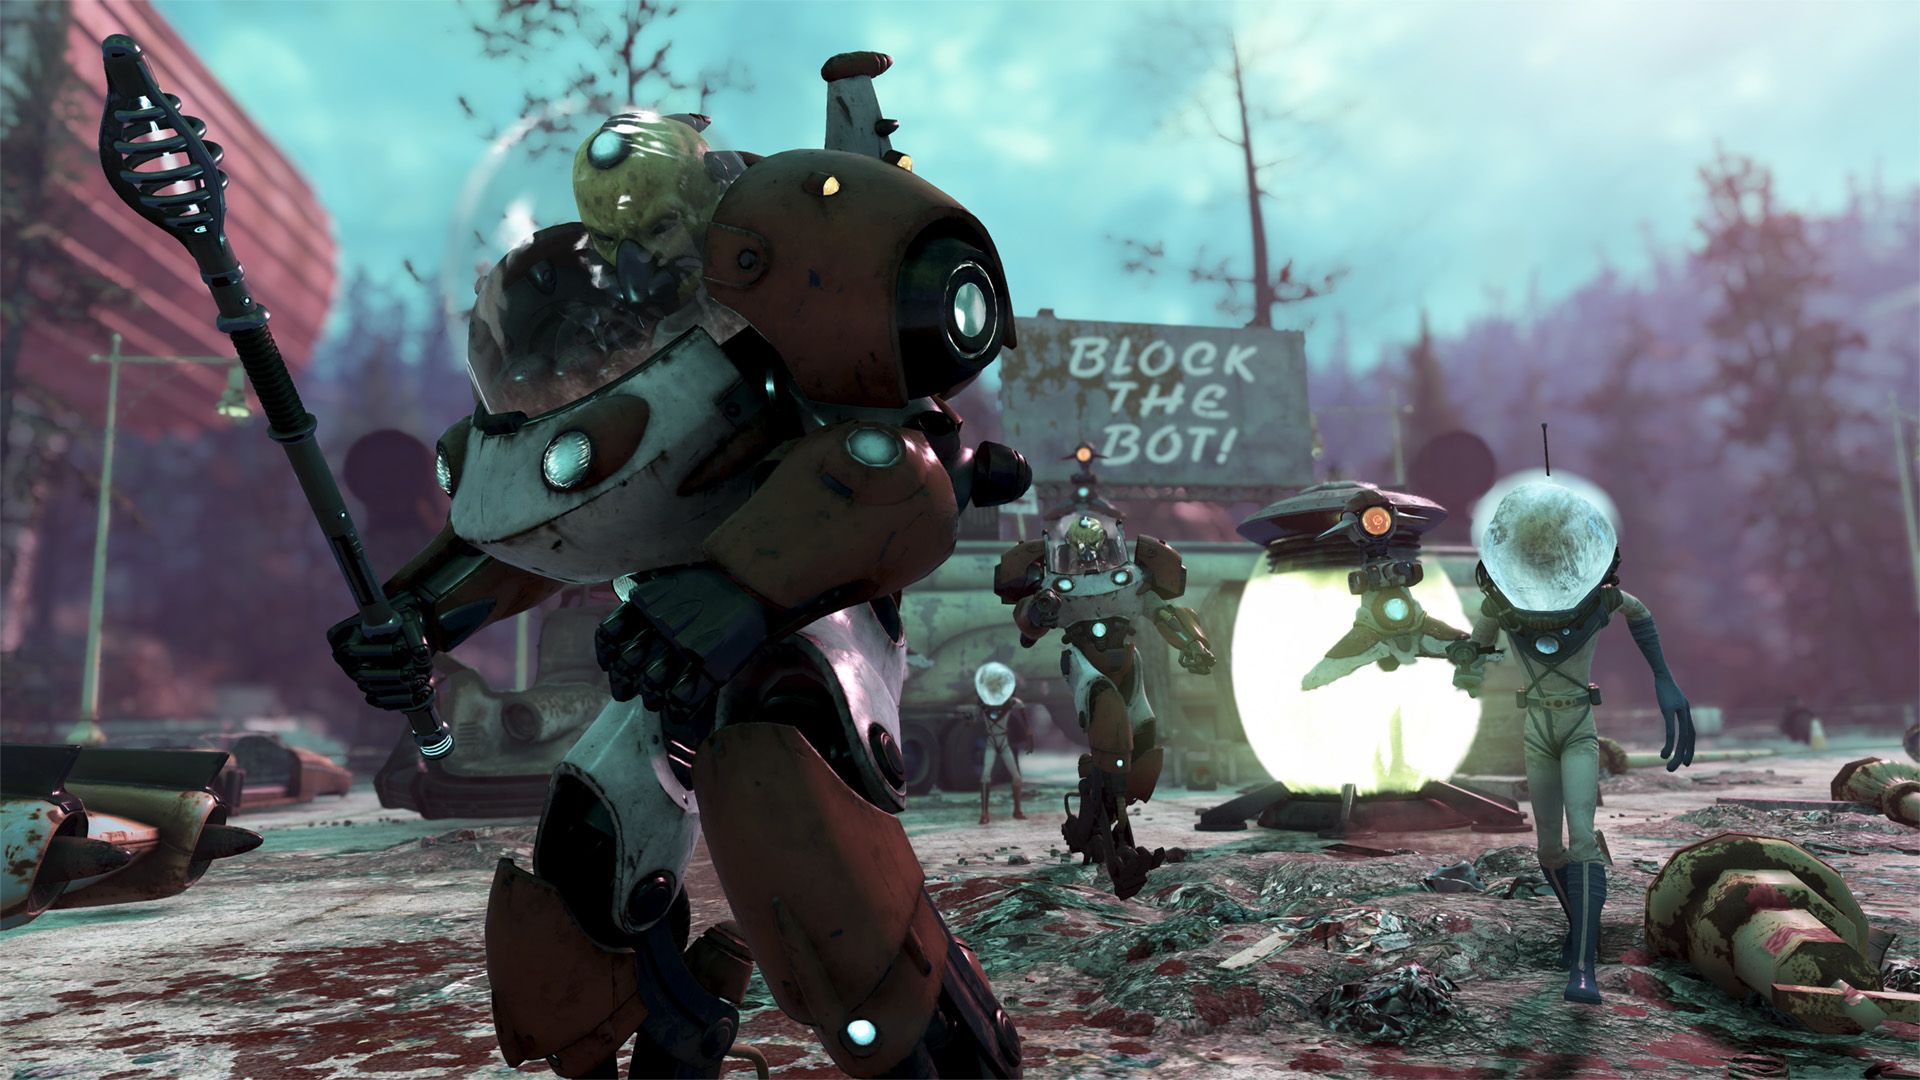 Fallout 76 Invaders from Beyond 2024 event screenshot 1 aliens running in front of block the bot sign